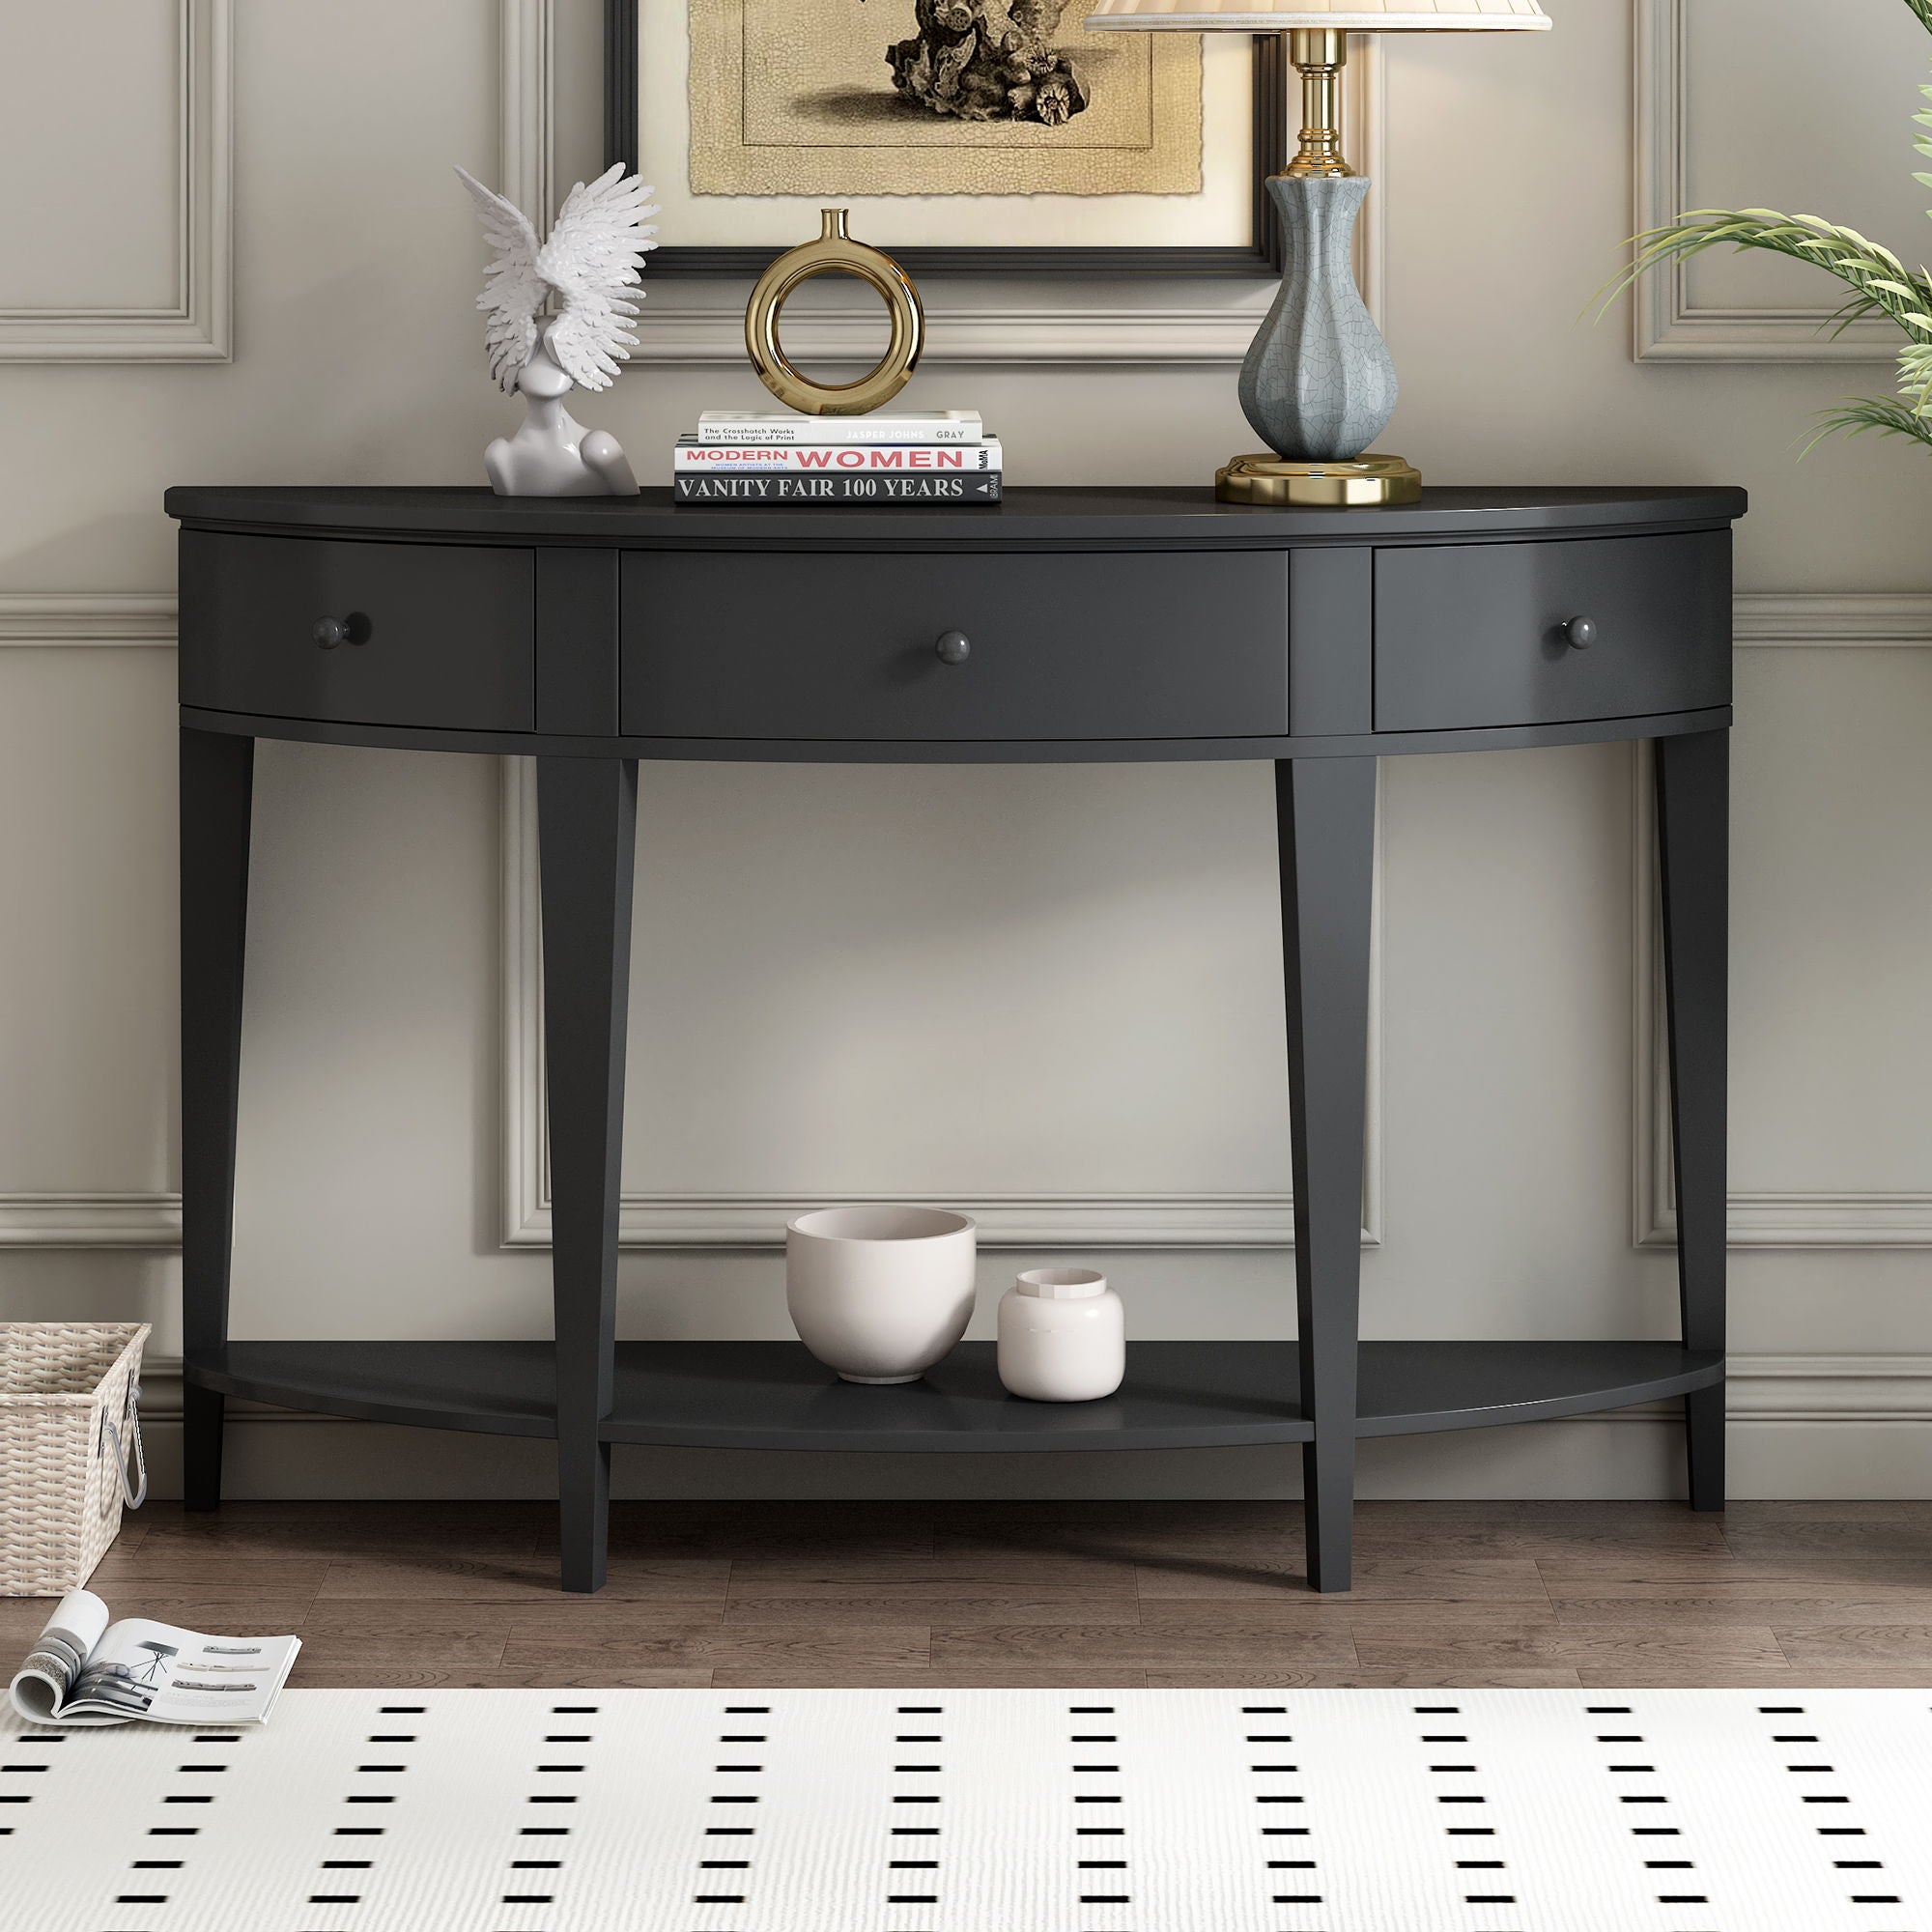 U-Style Modern Curved Console Table Sofa Table With 3 Drawers And 1 Shelf For Hallway, Entryway, Living Room - Black